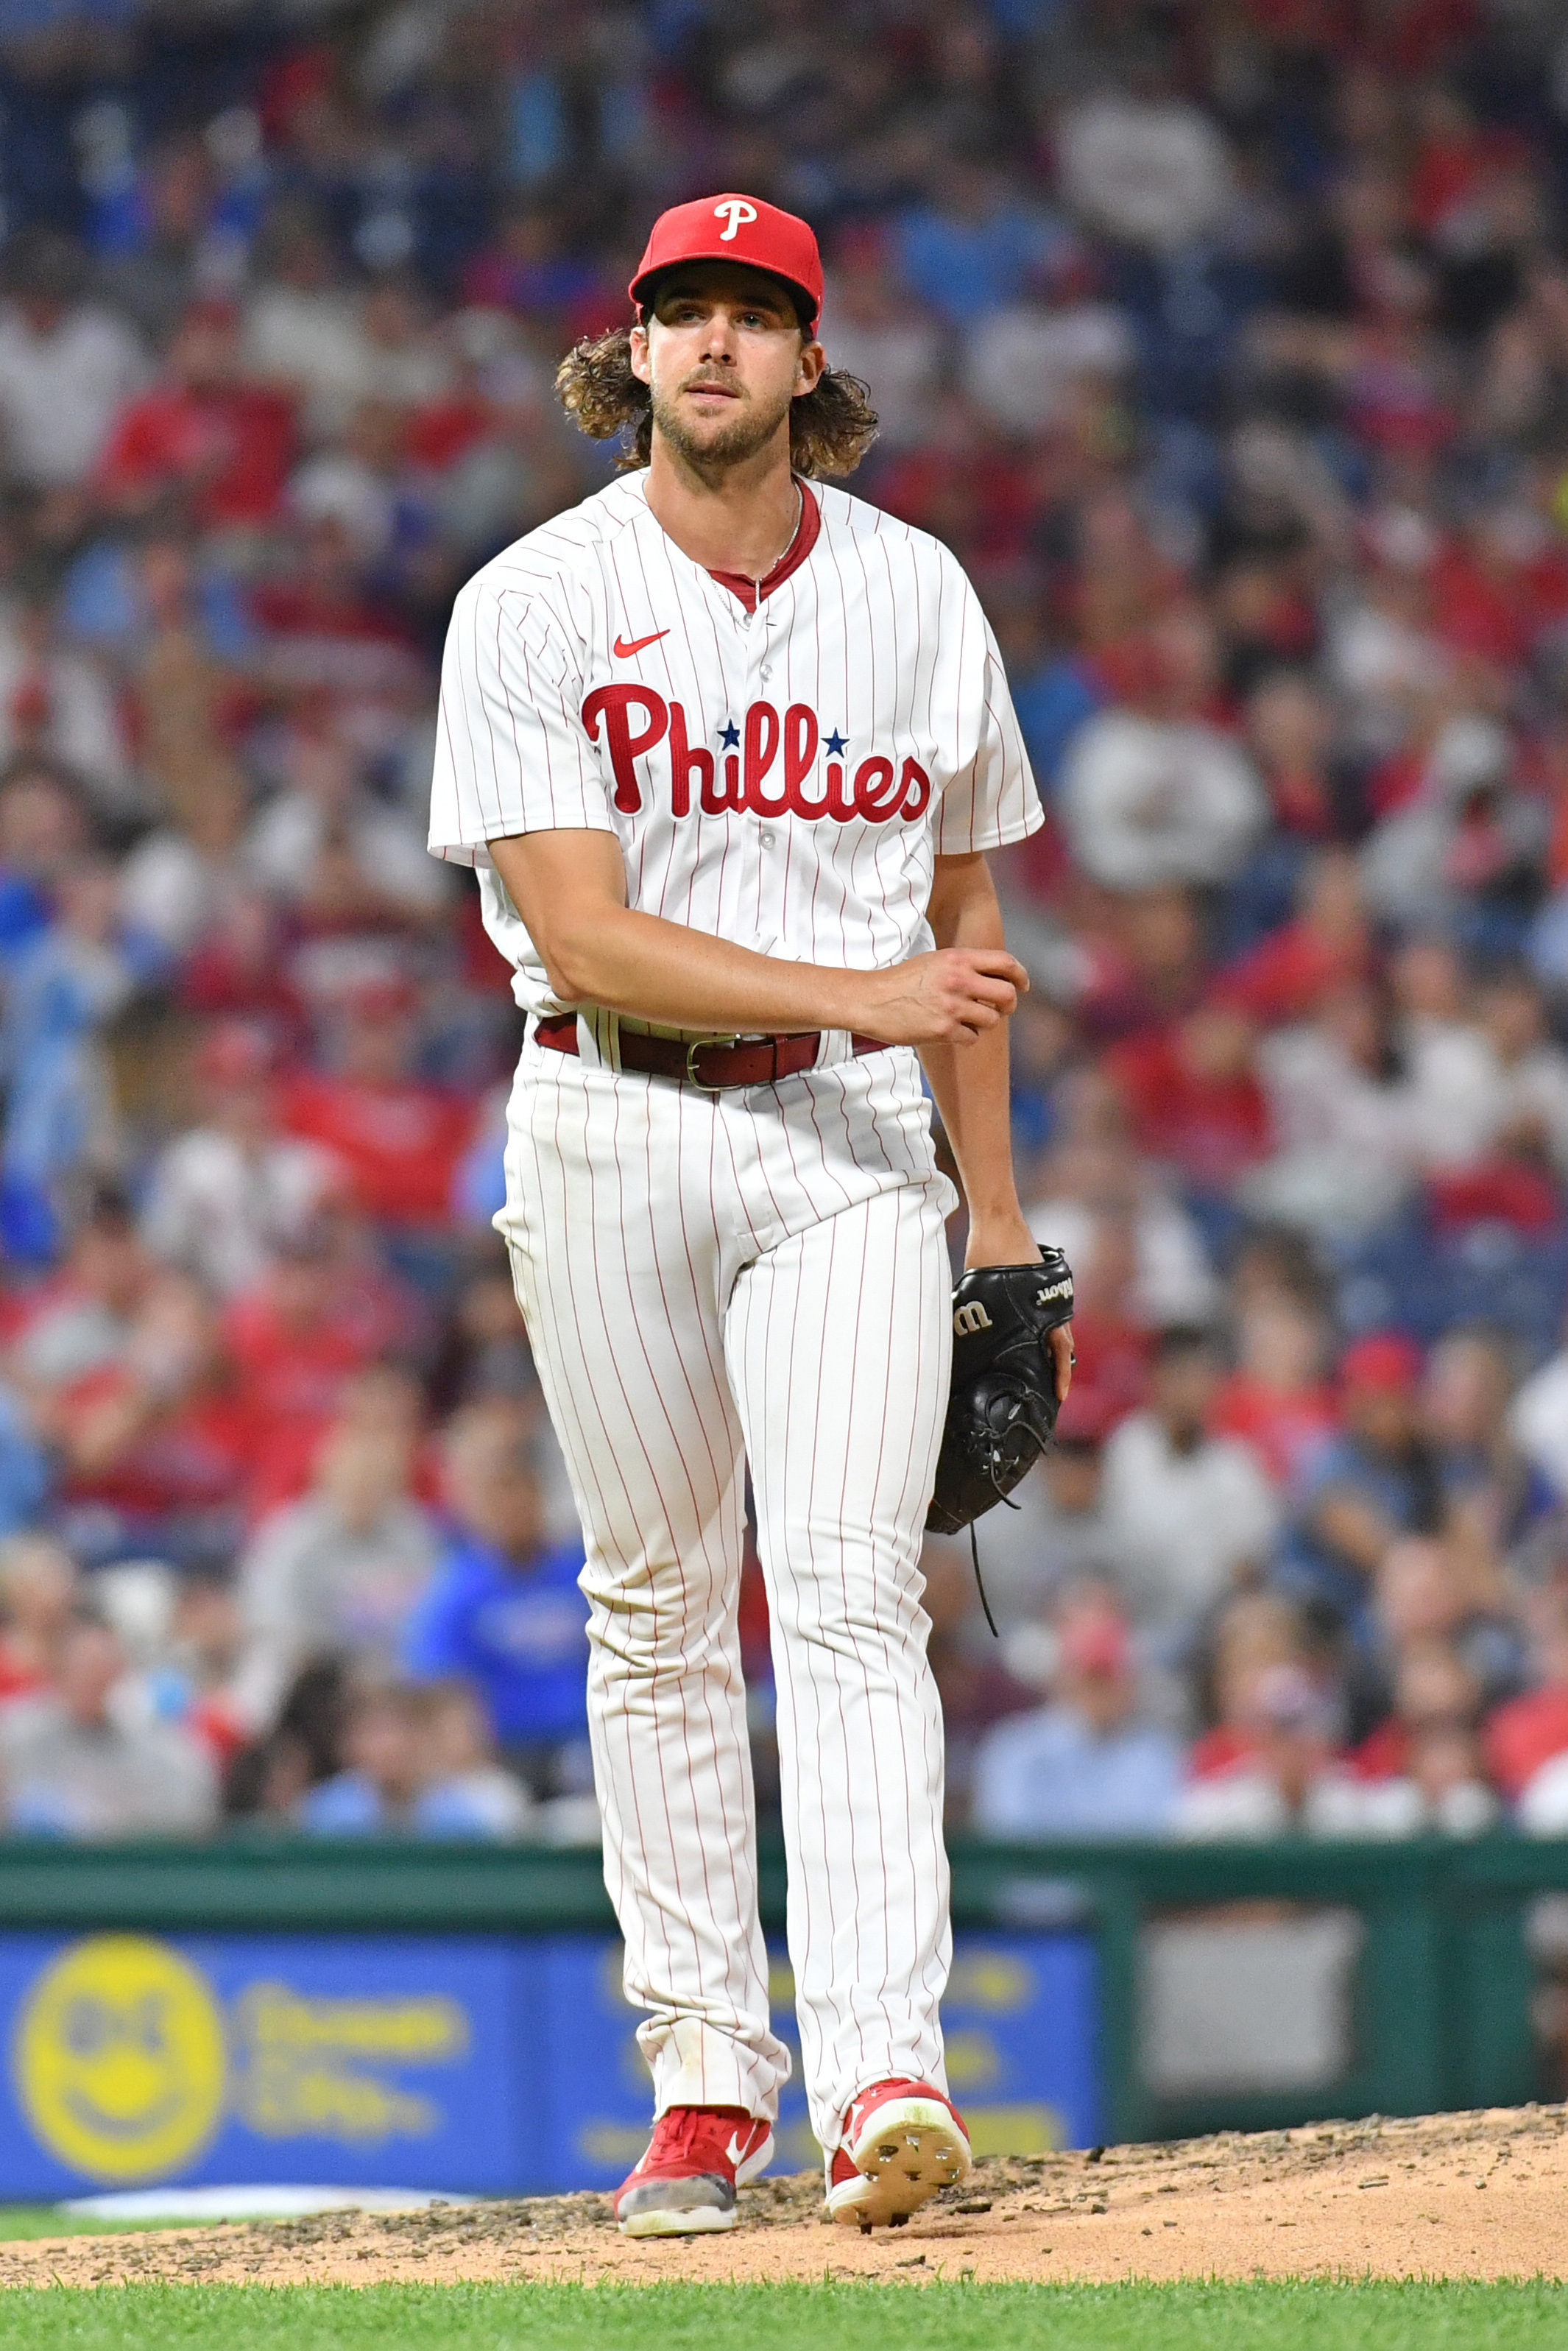 Aaron Nola aims to stay healthy, stay in rotation – thereporteronline